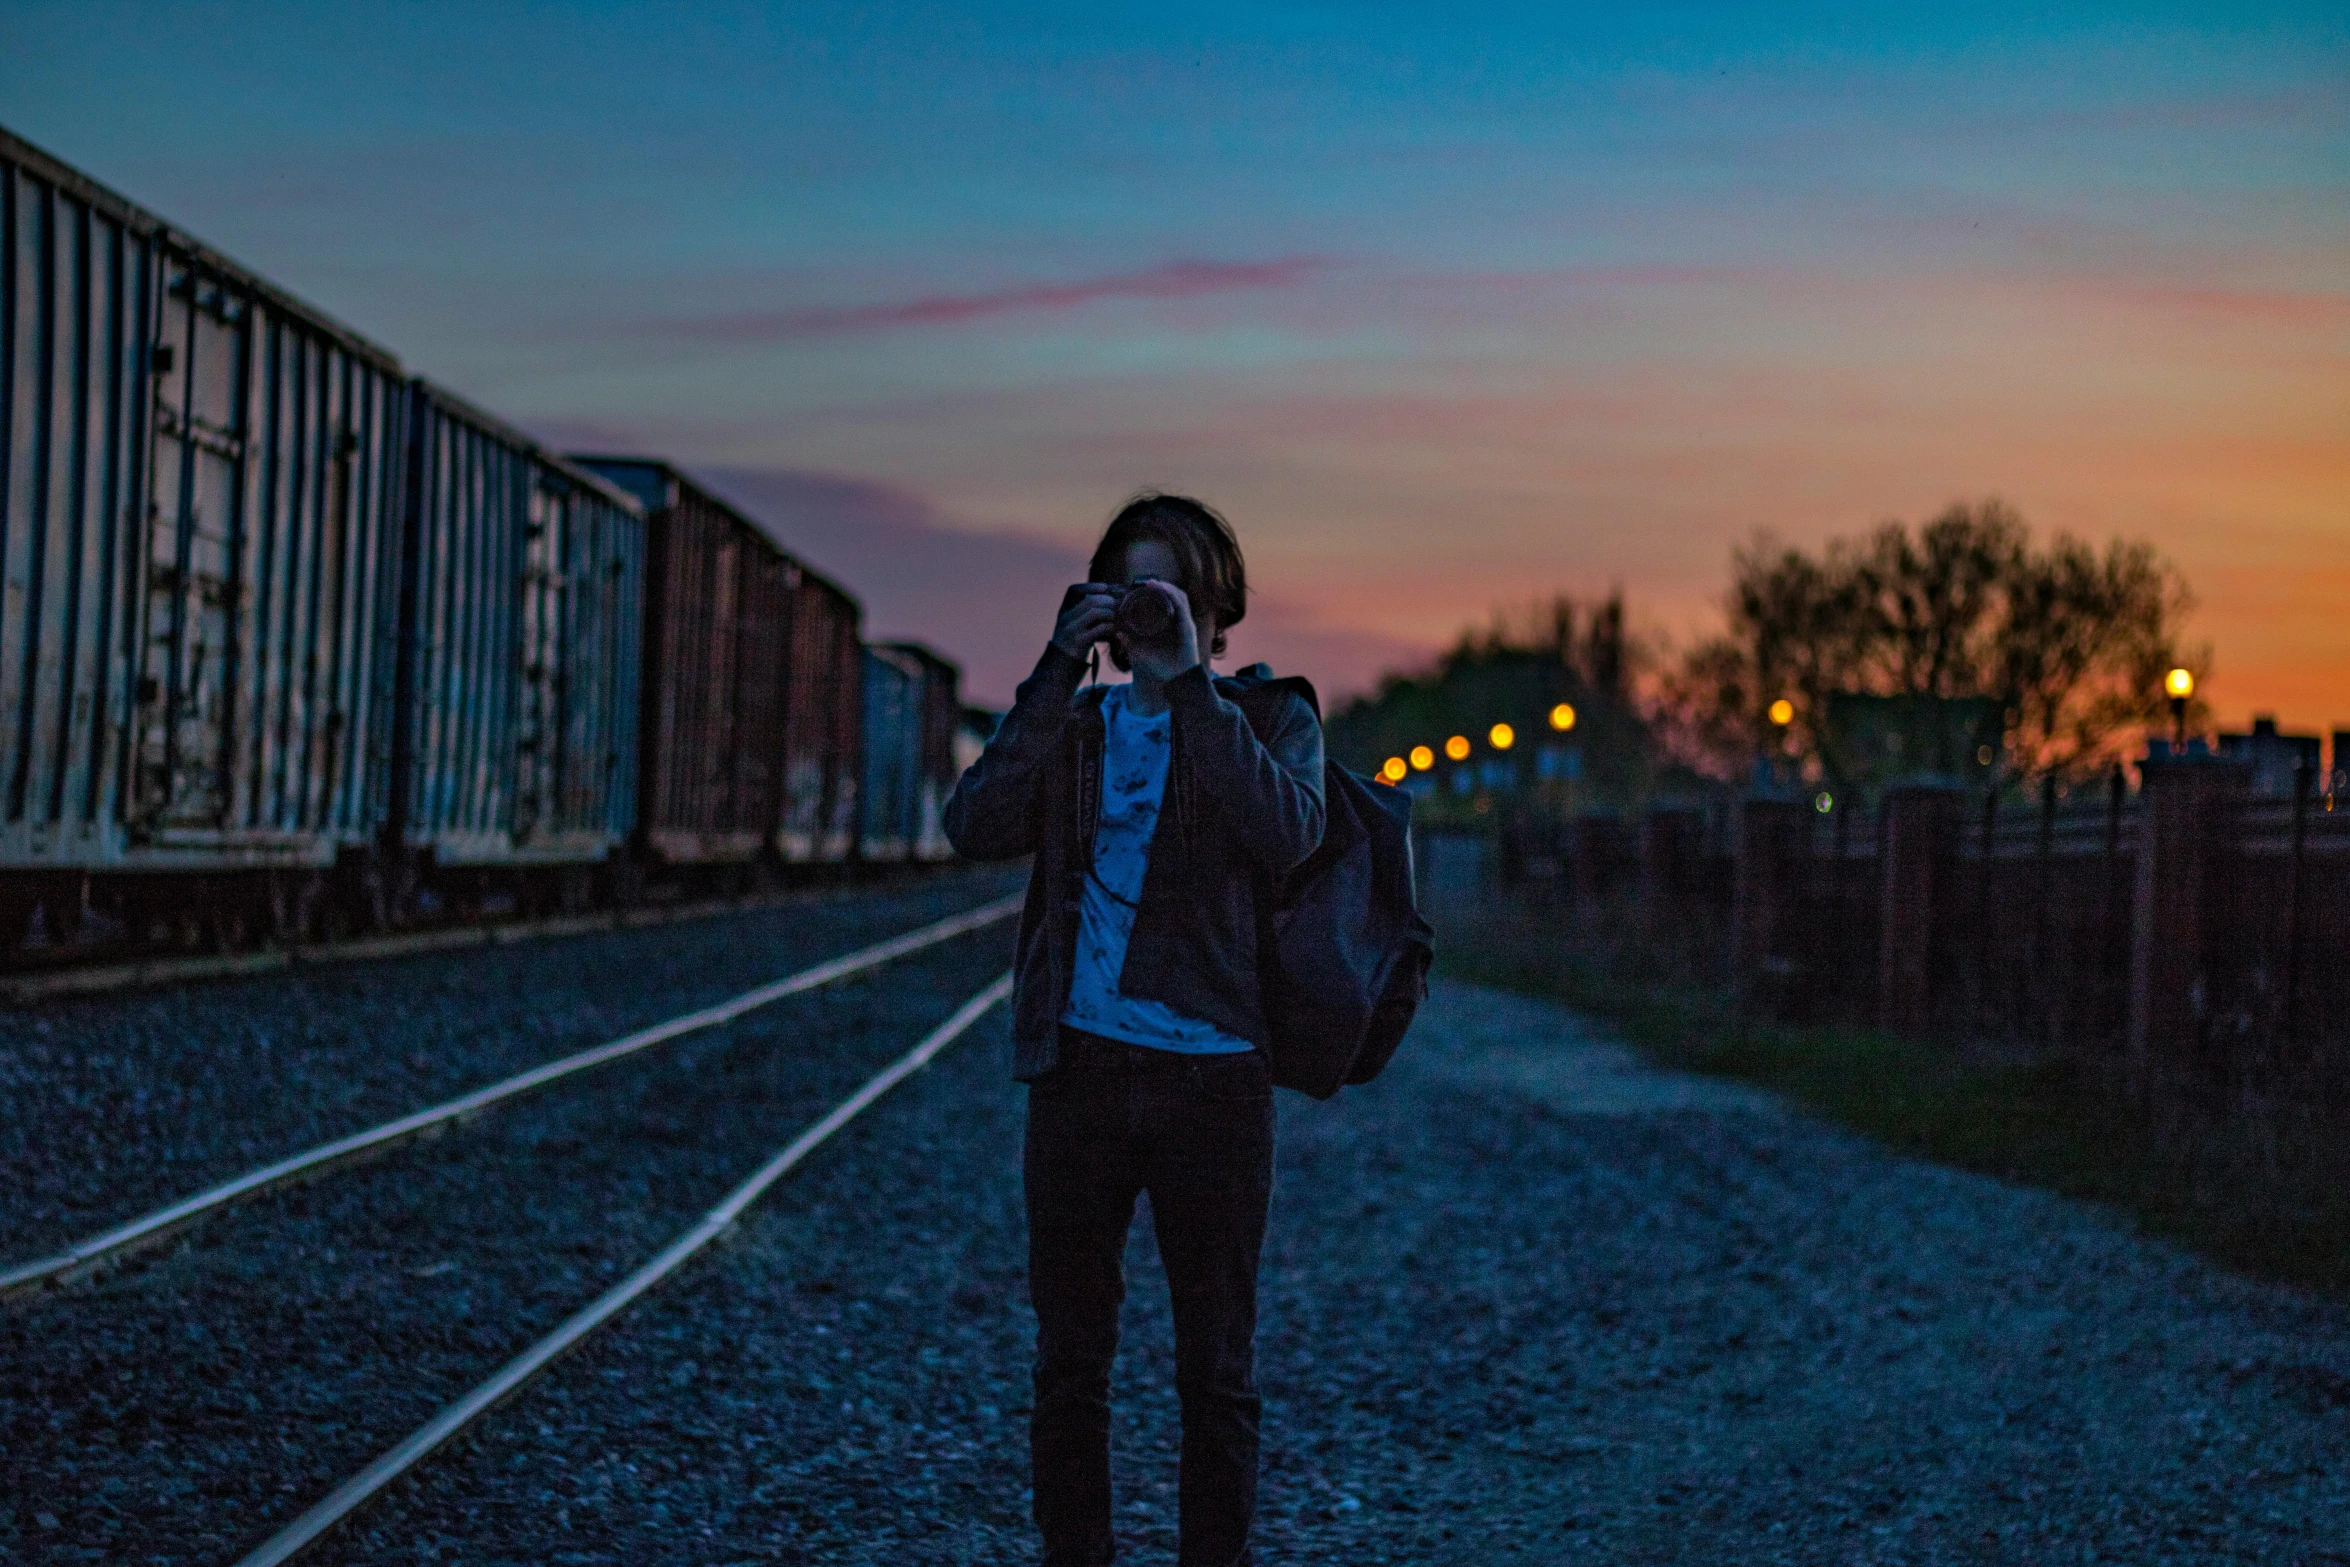 a woman standing on a train track talking on a cell phone, a picture, pexels contest winner, a man wearing a backpack, predawn, alternate album cover, profile pic